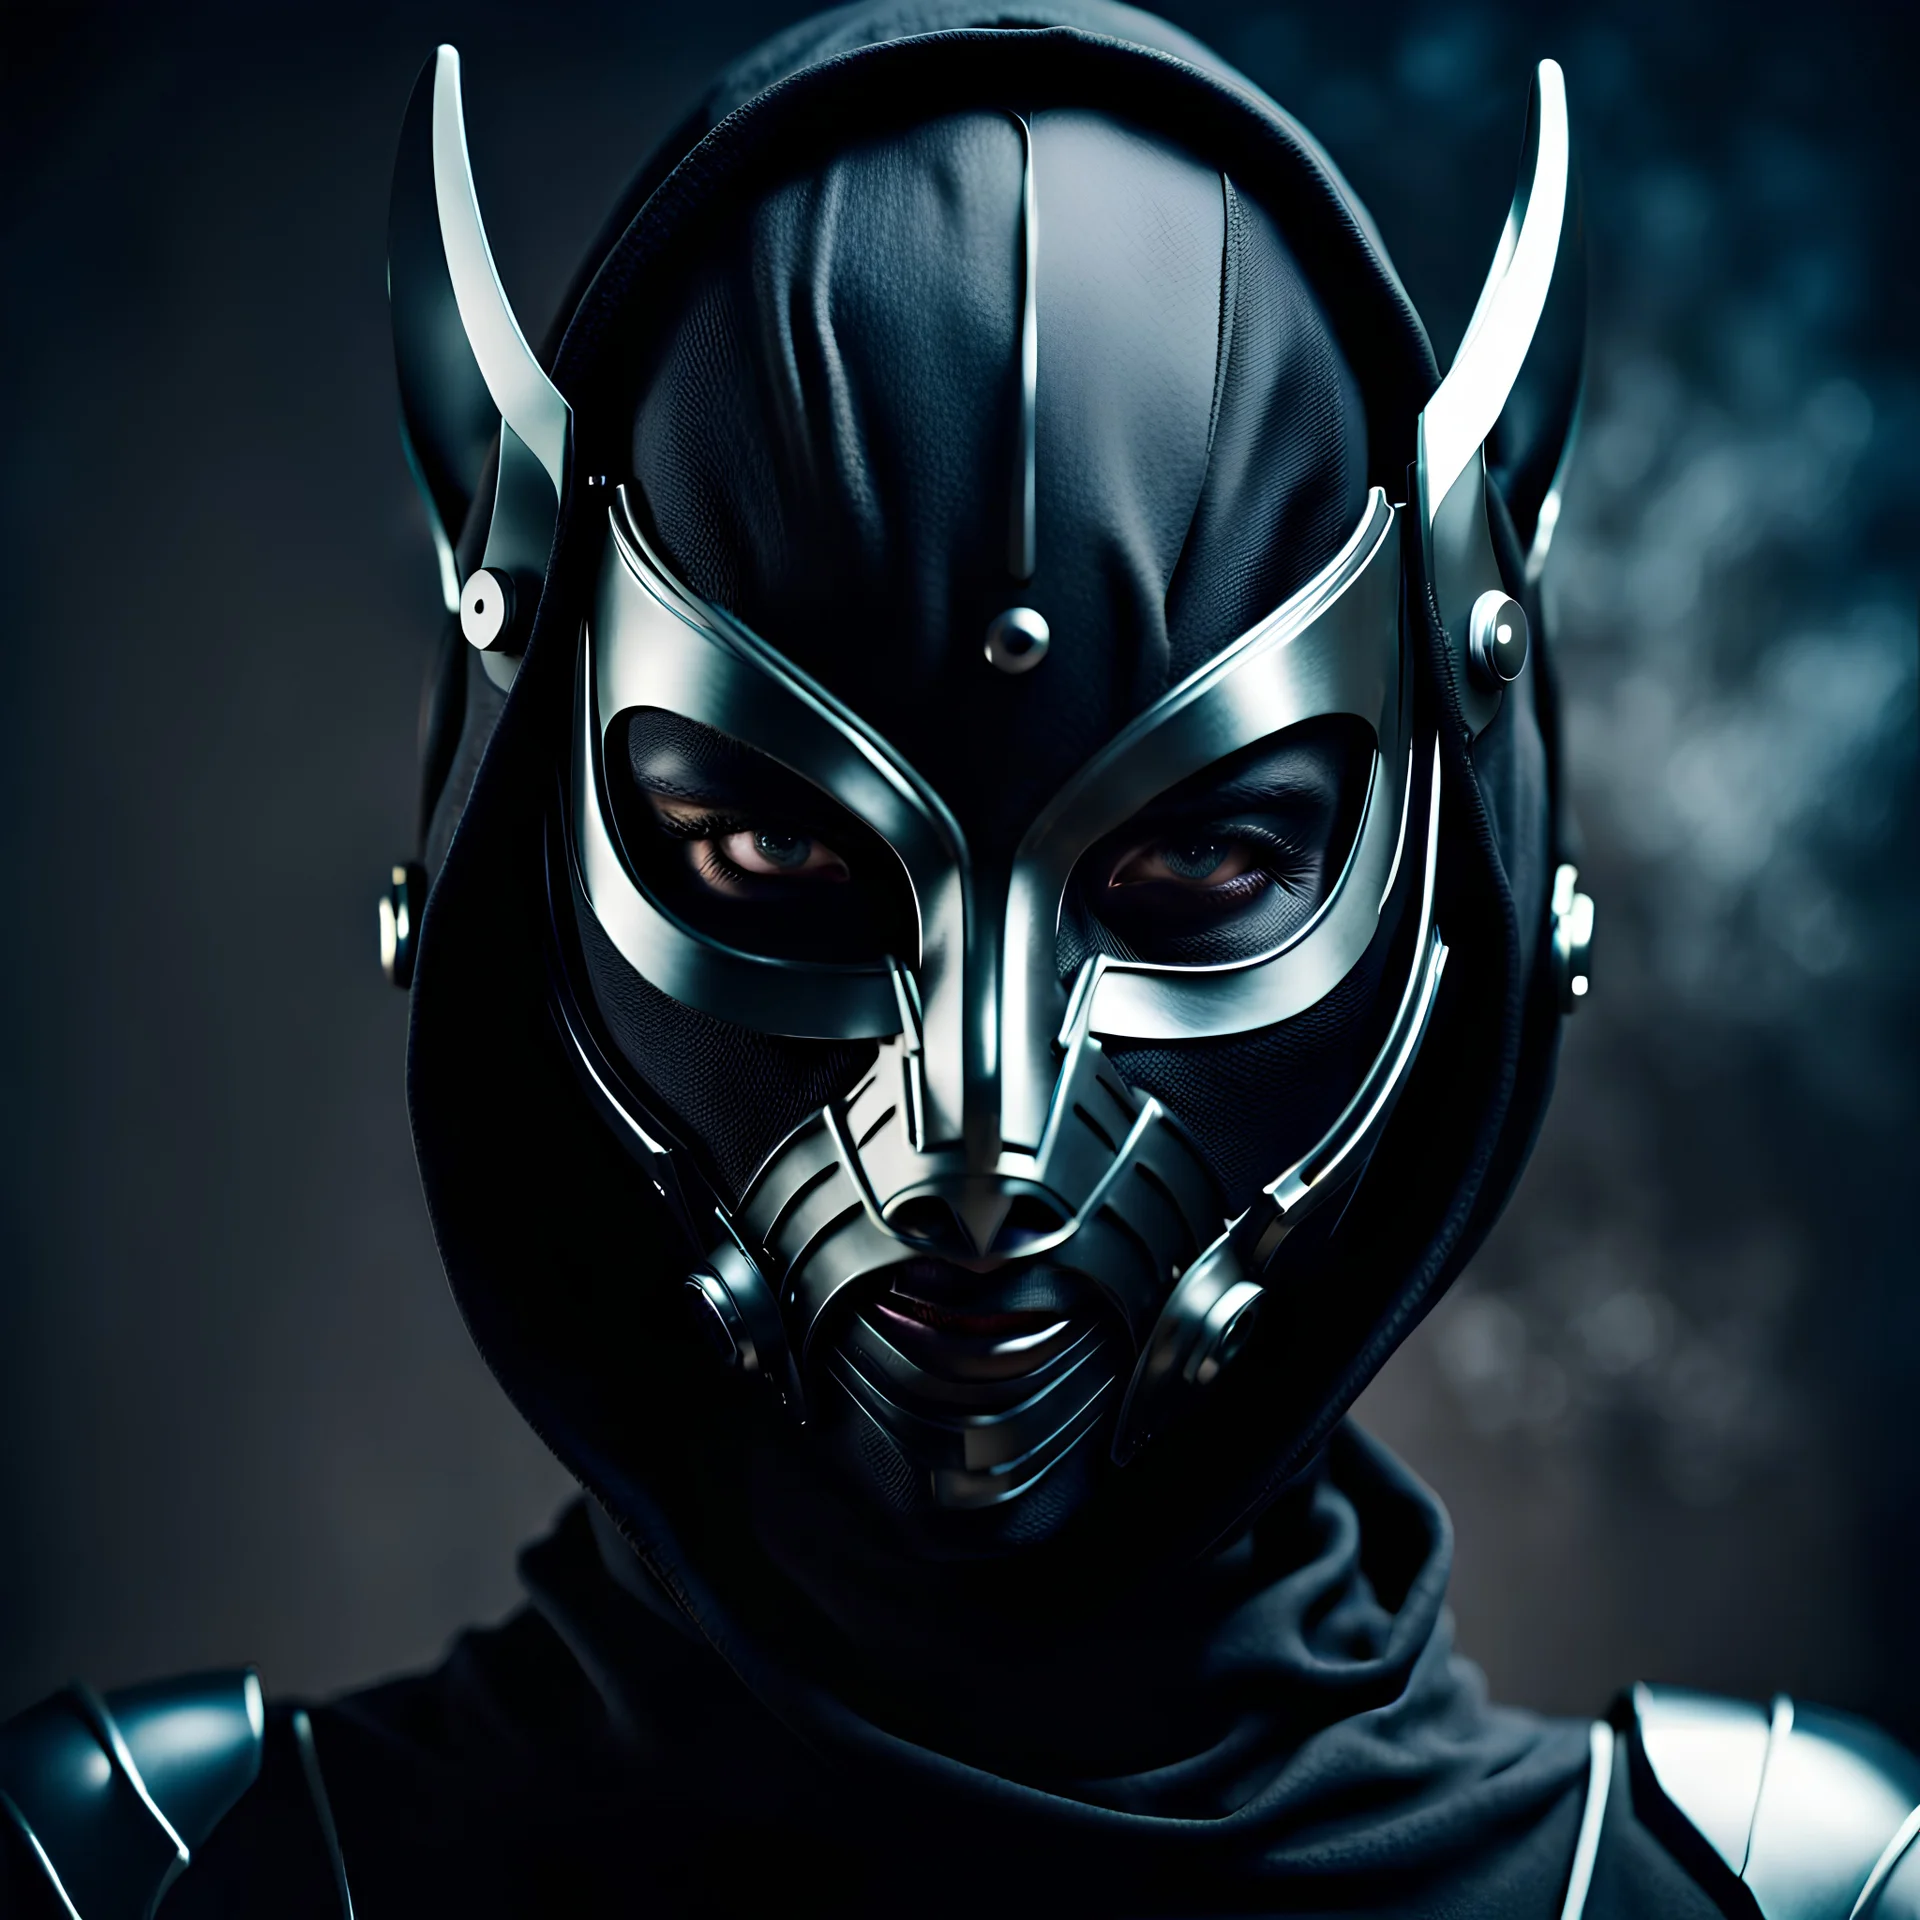 futuristic female marauder wearing a rblack full face mask covering her entire face and head, intimidating masquerade mask, demon mask, anime style